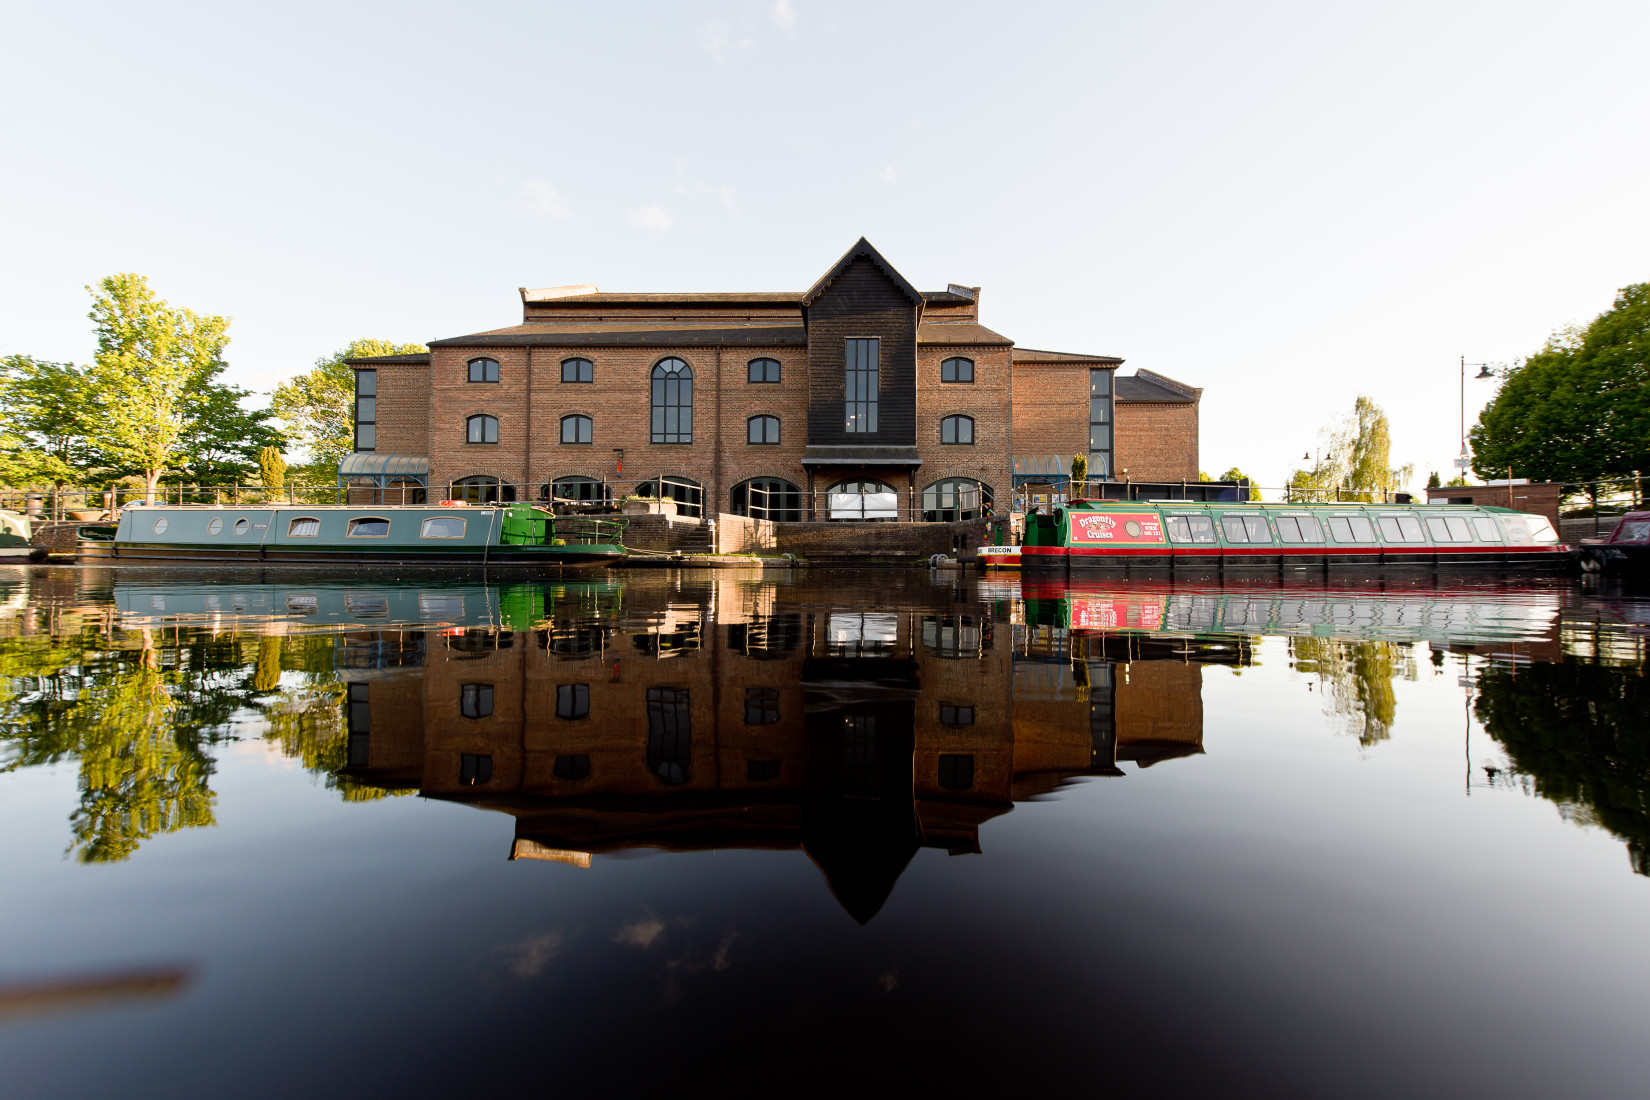 Image of a peaceful looking modern theatre building with its reflection in a body of water